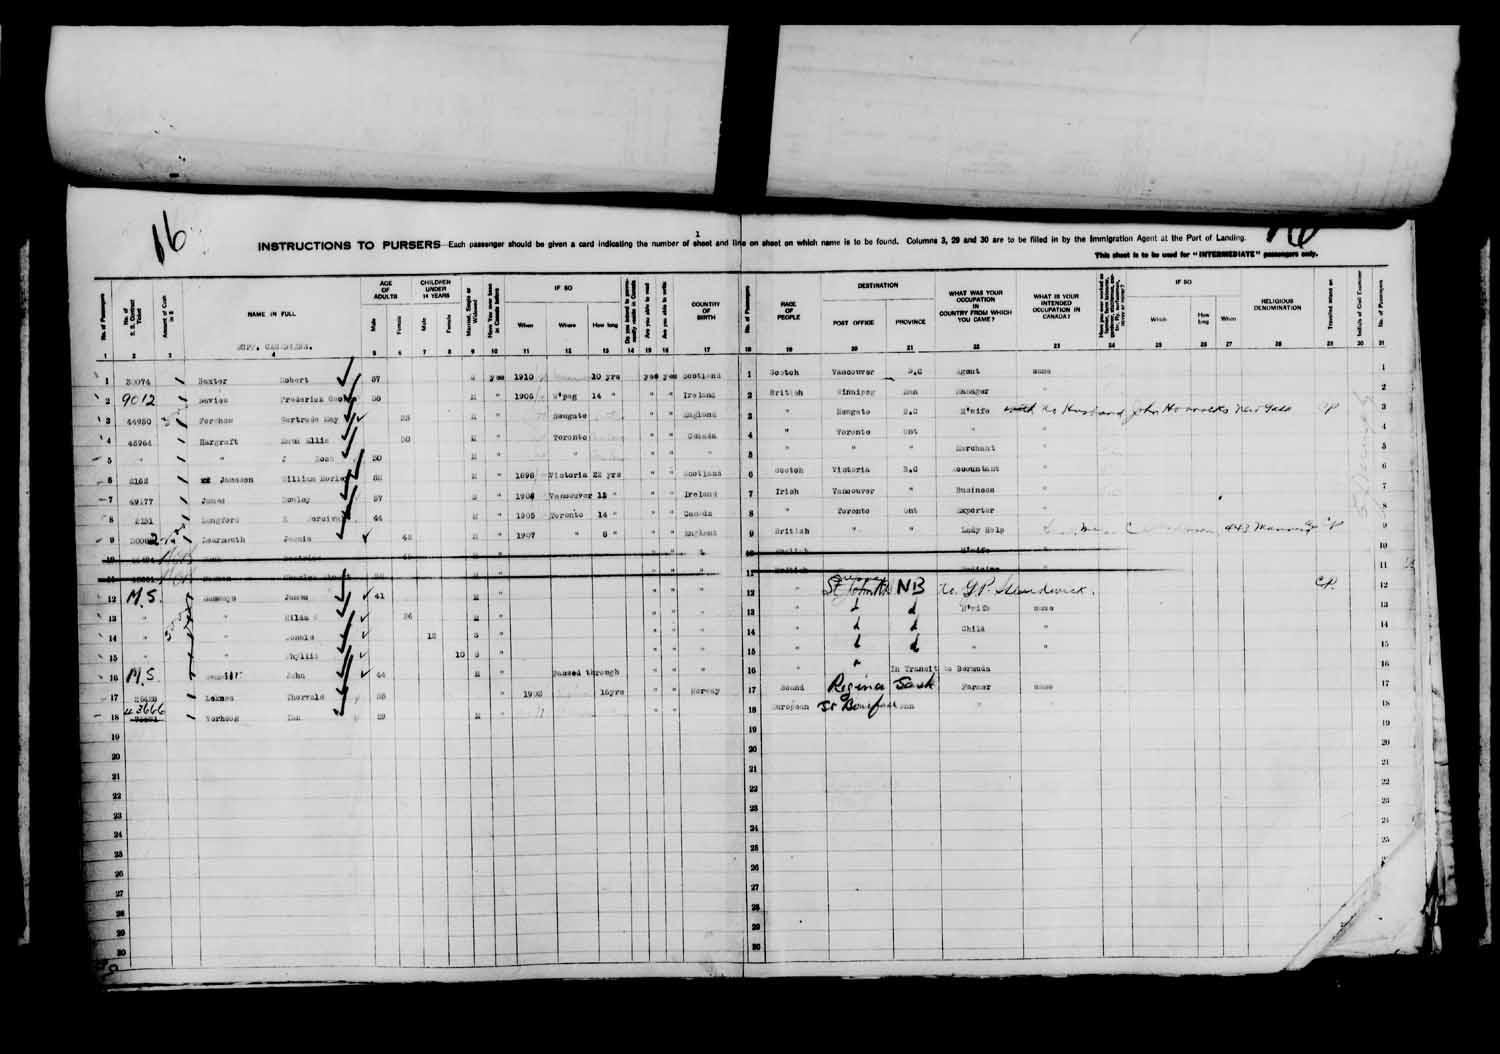 Digitized page of Passenger Lists for Image No.: e003610623